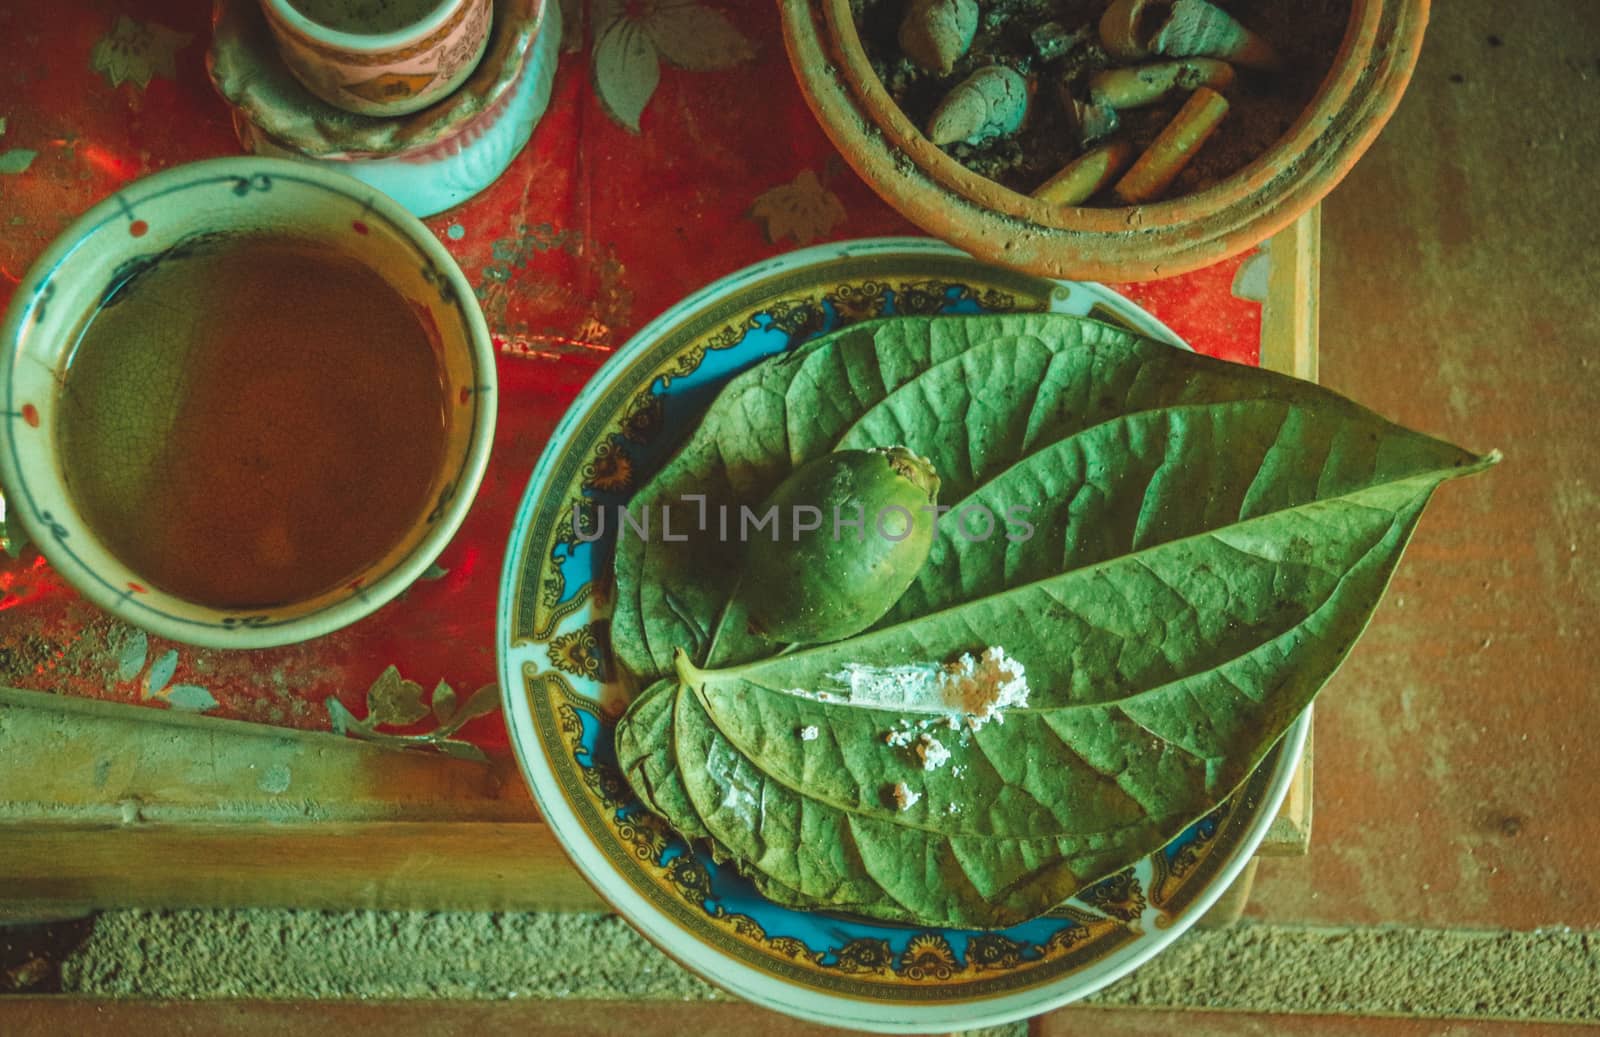 Betel Nut and Leaf by Sonnet15